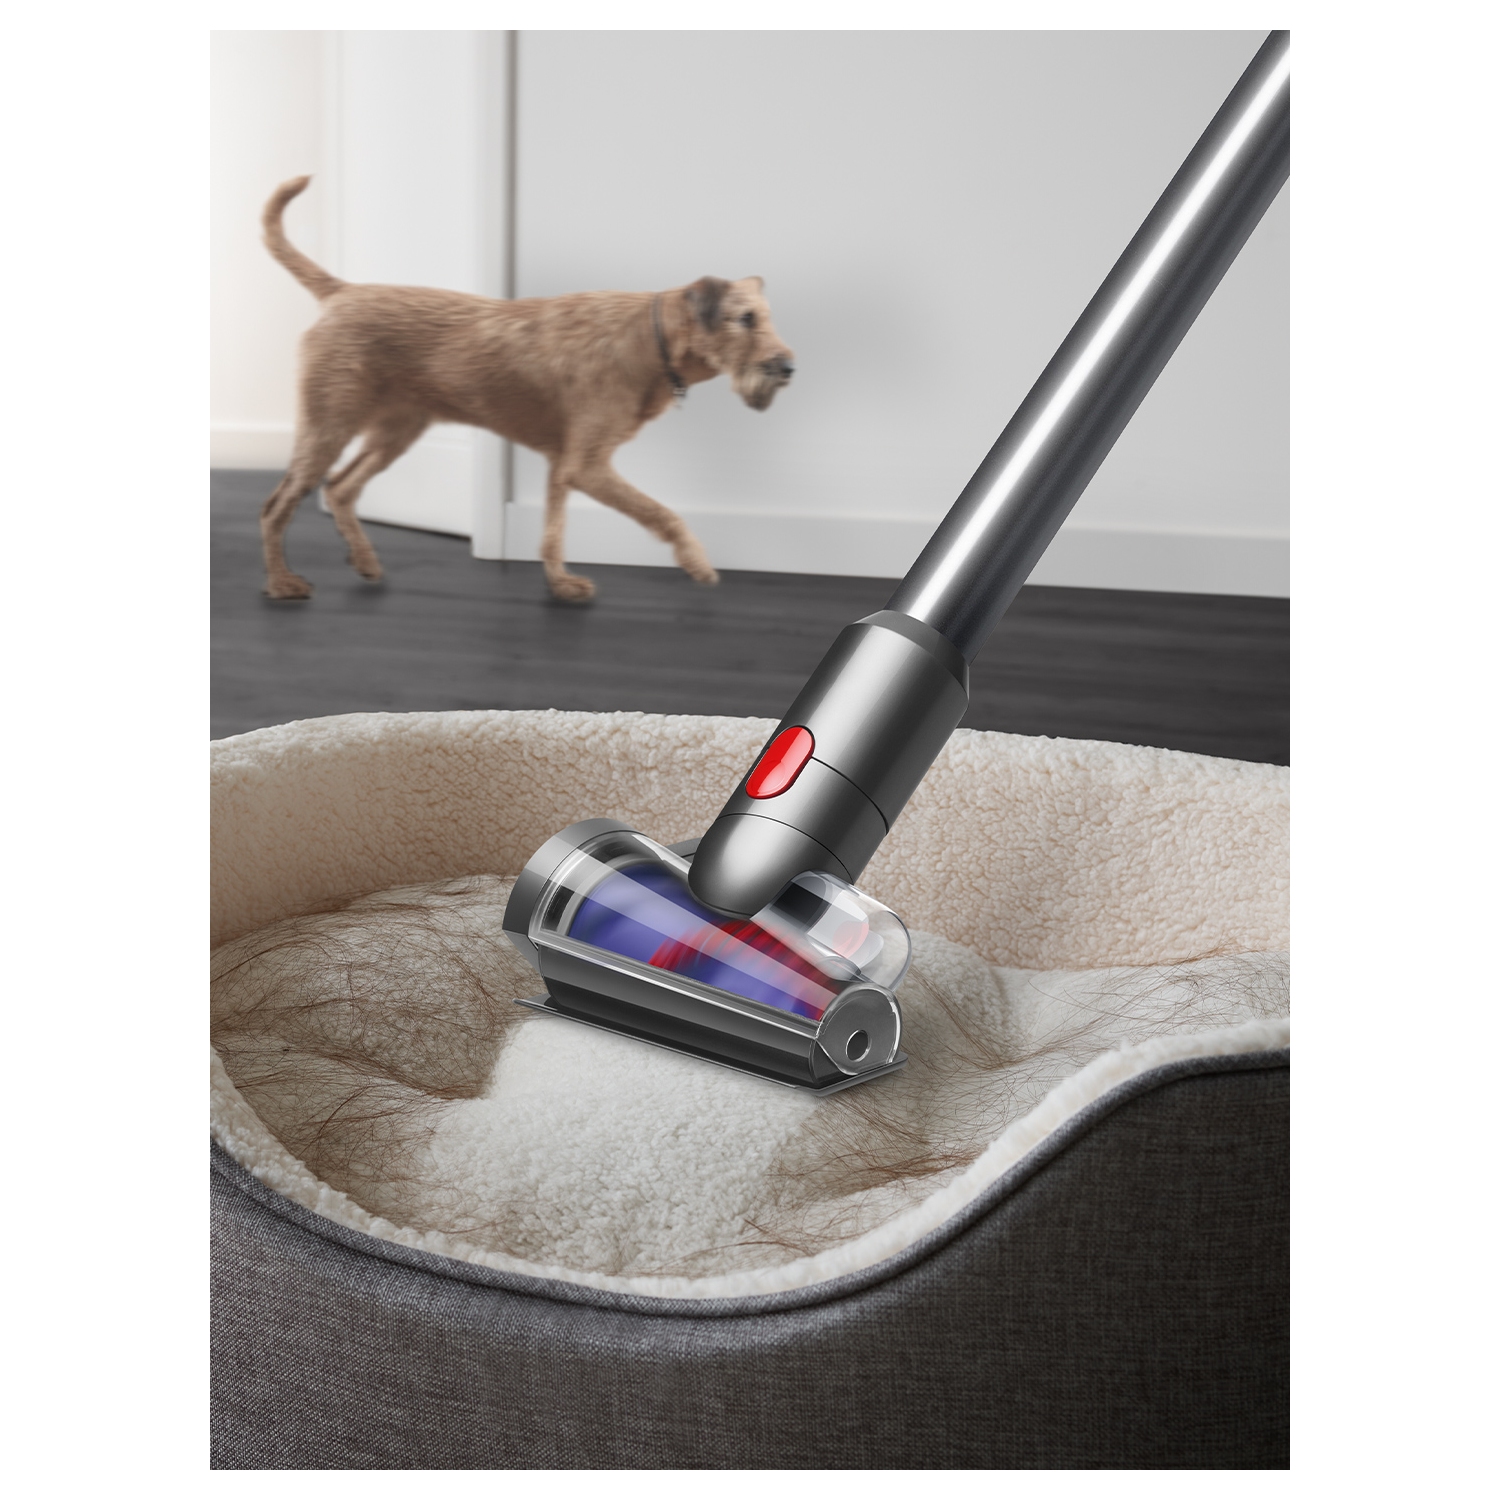 Dyson V15 Detect Animal Cordless Stick Cleaner - 60 Minutes Run Time - 3